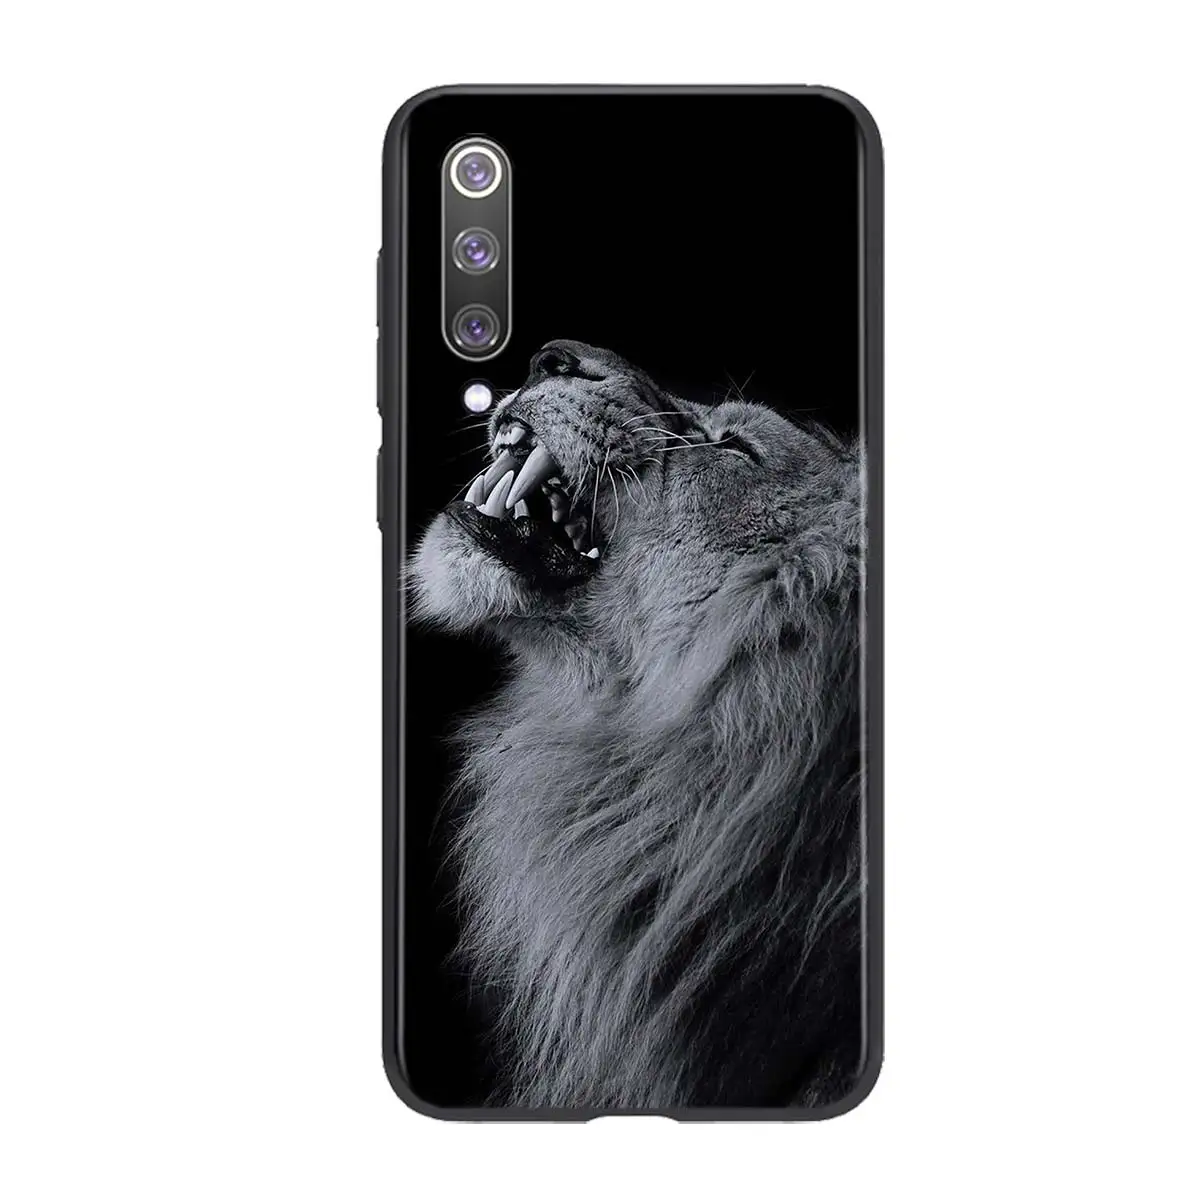 The Lion king animal For Xiaomi Mi 11 10T Note 10 Poco X3 NFC M2 X2 F2 C3 M3 Play Mix 3 A2 8 Lite Pro Phone Case best phone cases for xiaomi